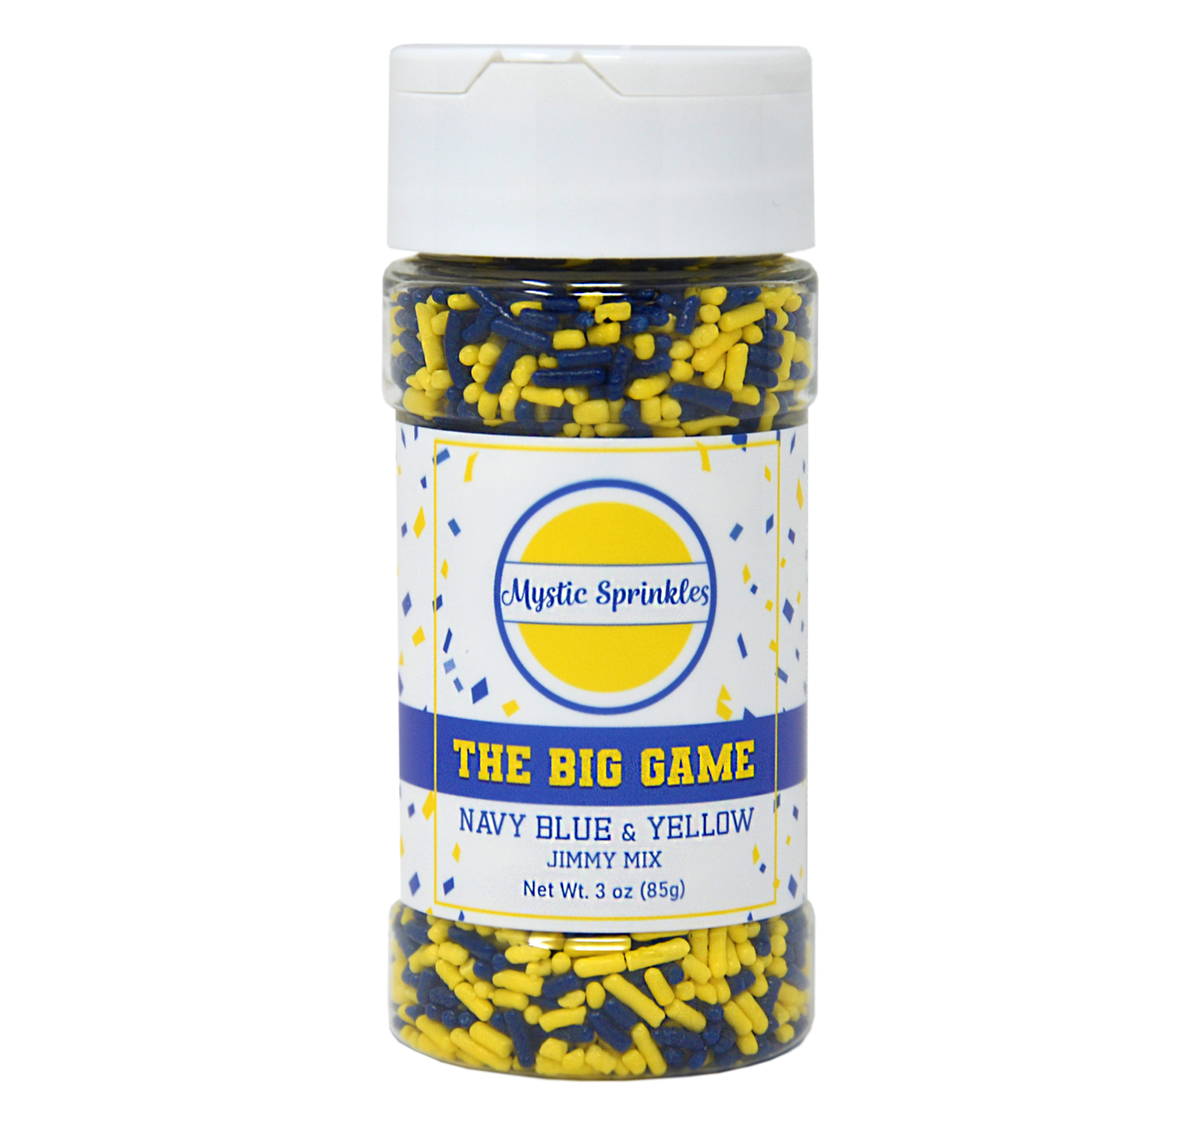 The Big Game: Navy Blue & Yellow Jimmy Mix 3oz Bottle